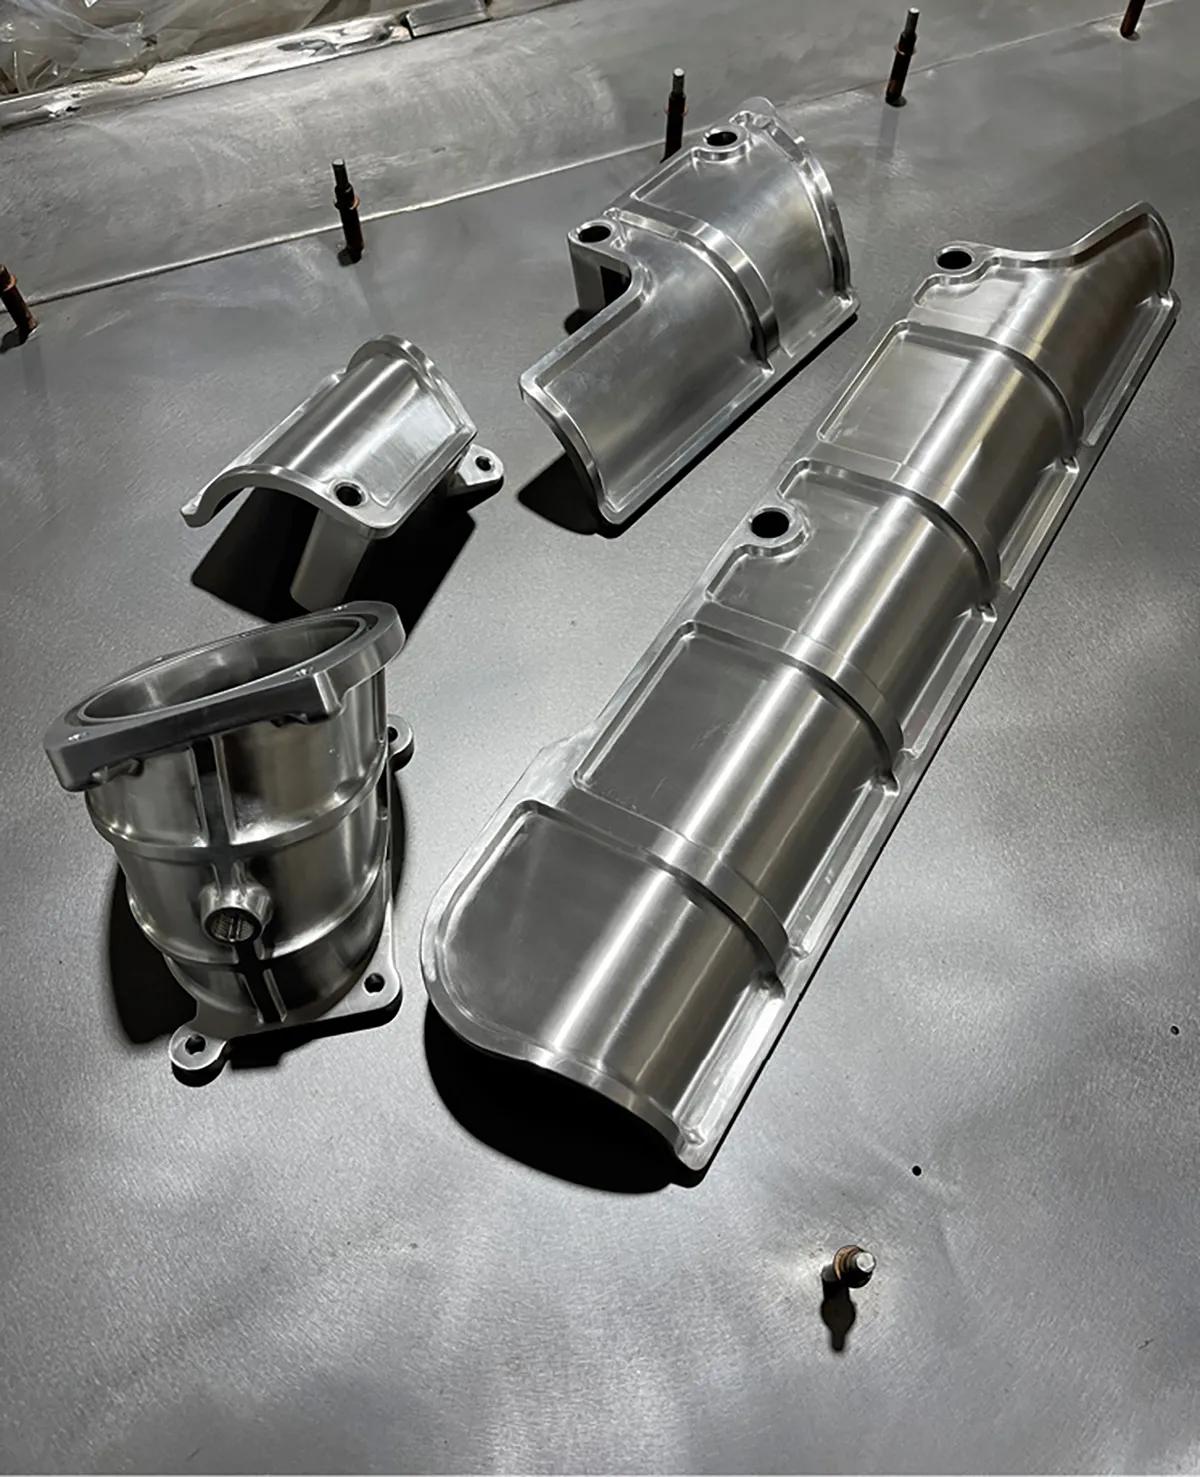 These are the final components just after being machined from aluminum billet.